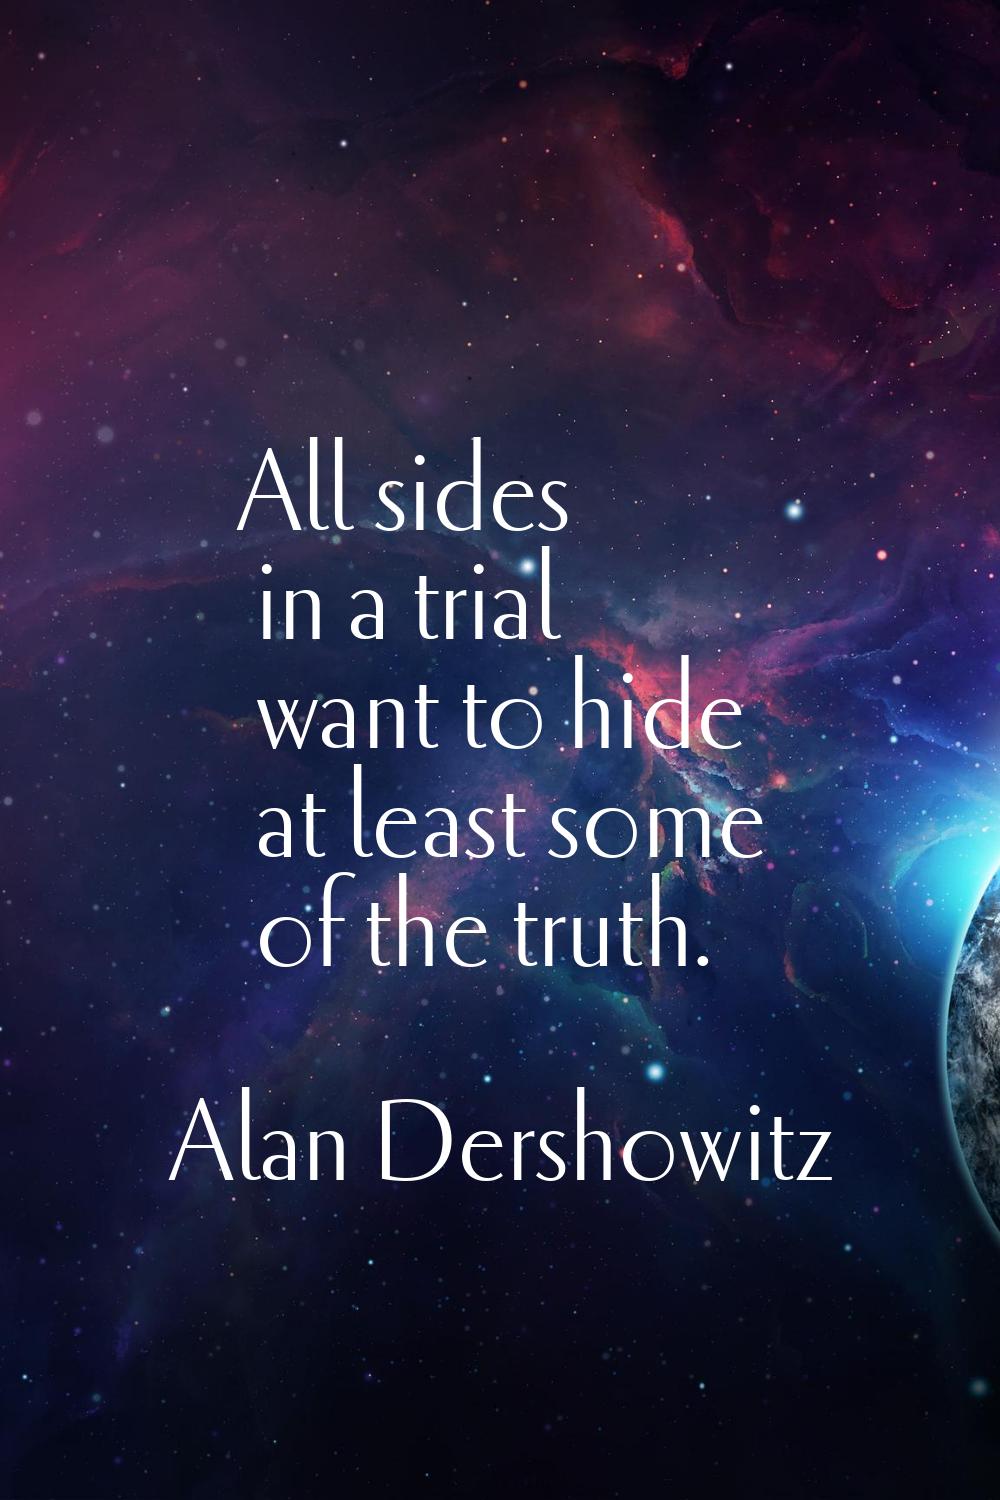 All sides in a trial want to hide at least some of the truth.